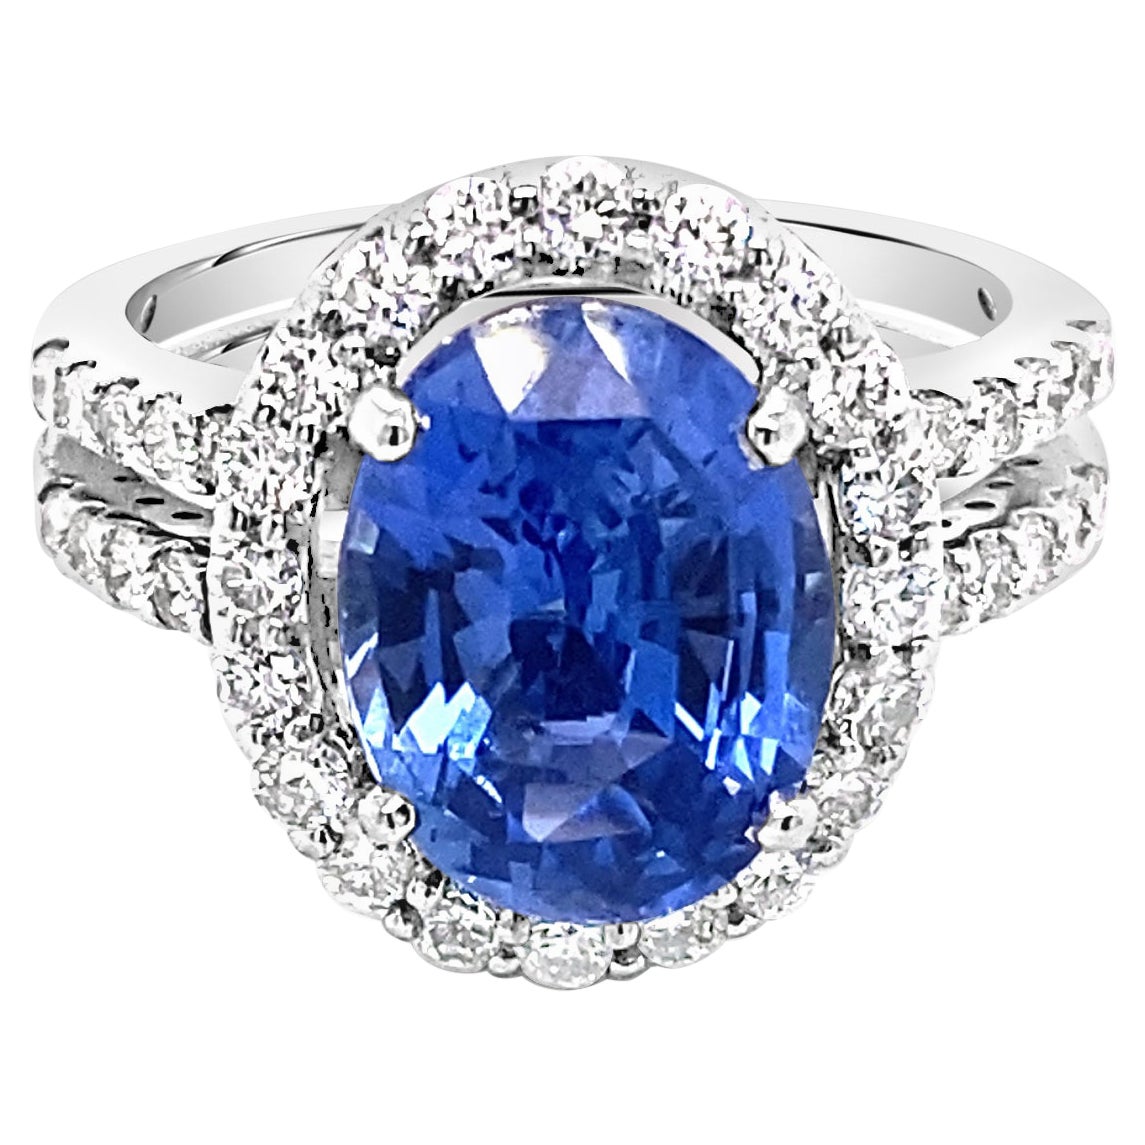 GIA 4.61 Carat Oval Burma Sapphire Ring with 0.73ctw Diamond Halo Cocktail Ring For Sale